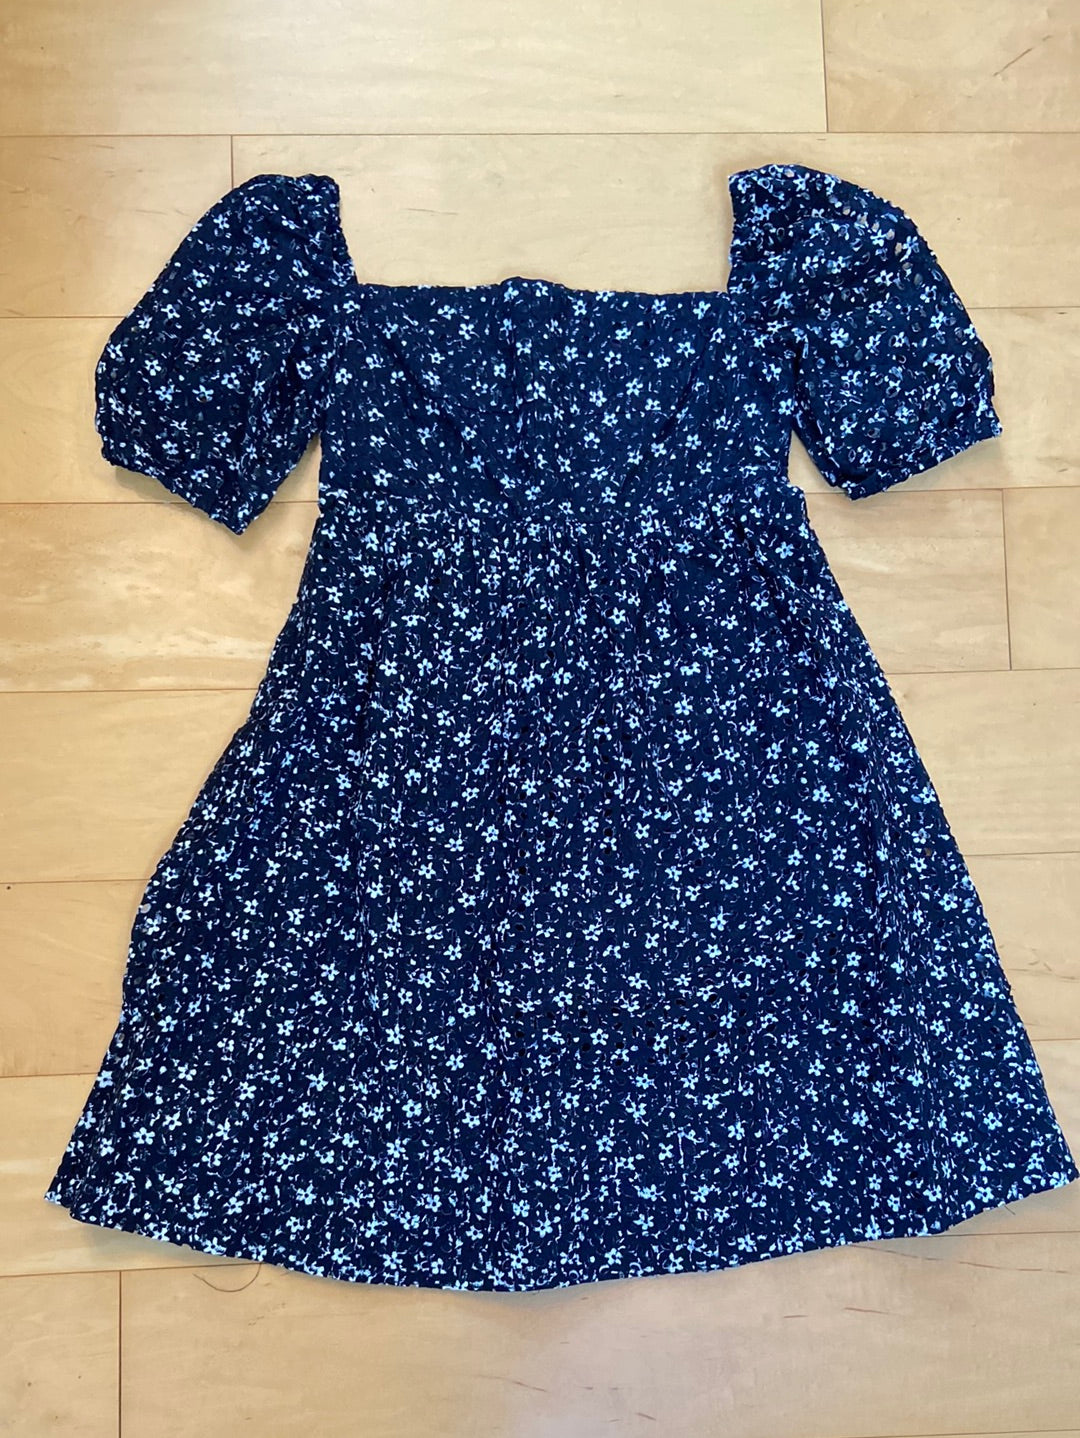 Navy blue with white eyelet dress puff sleeves short sleeve and length knee length skirt fit and flare style